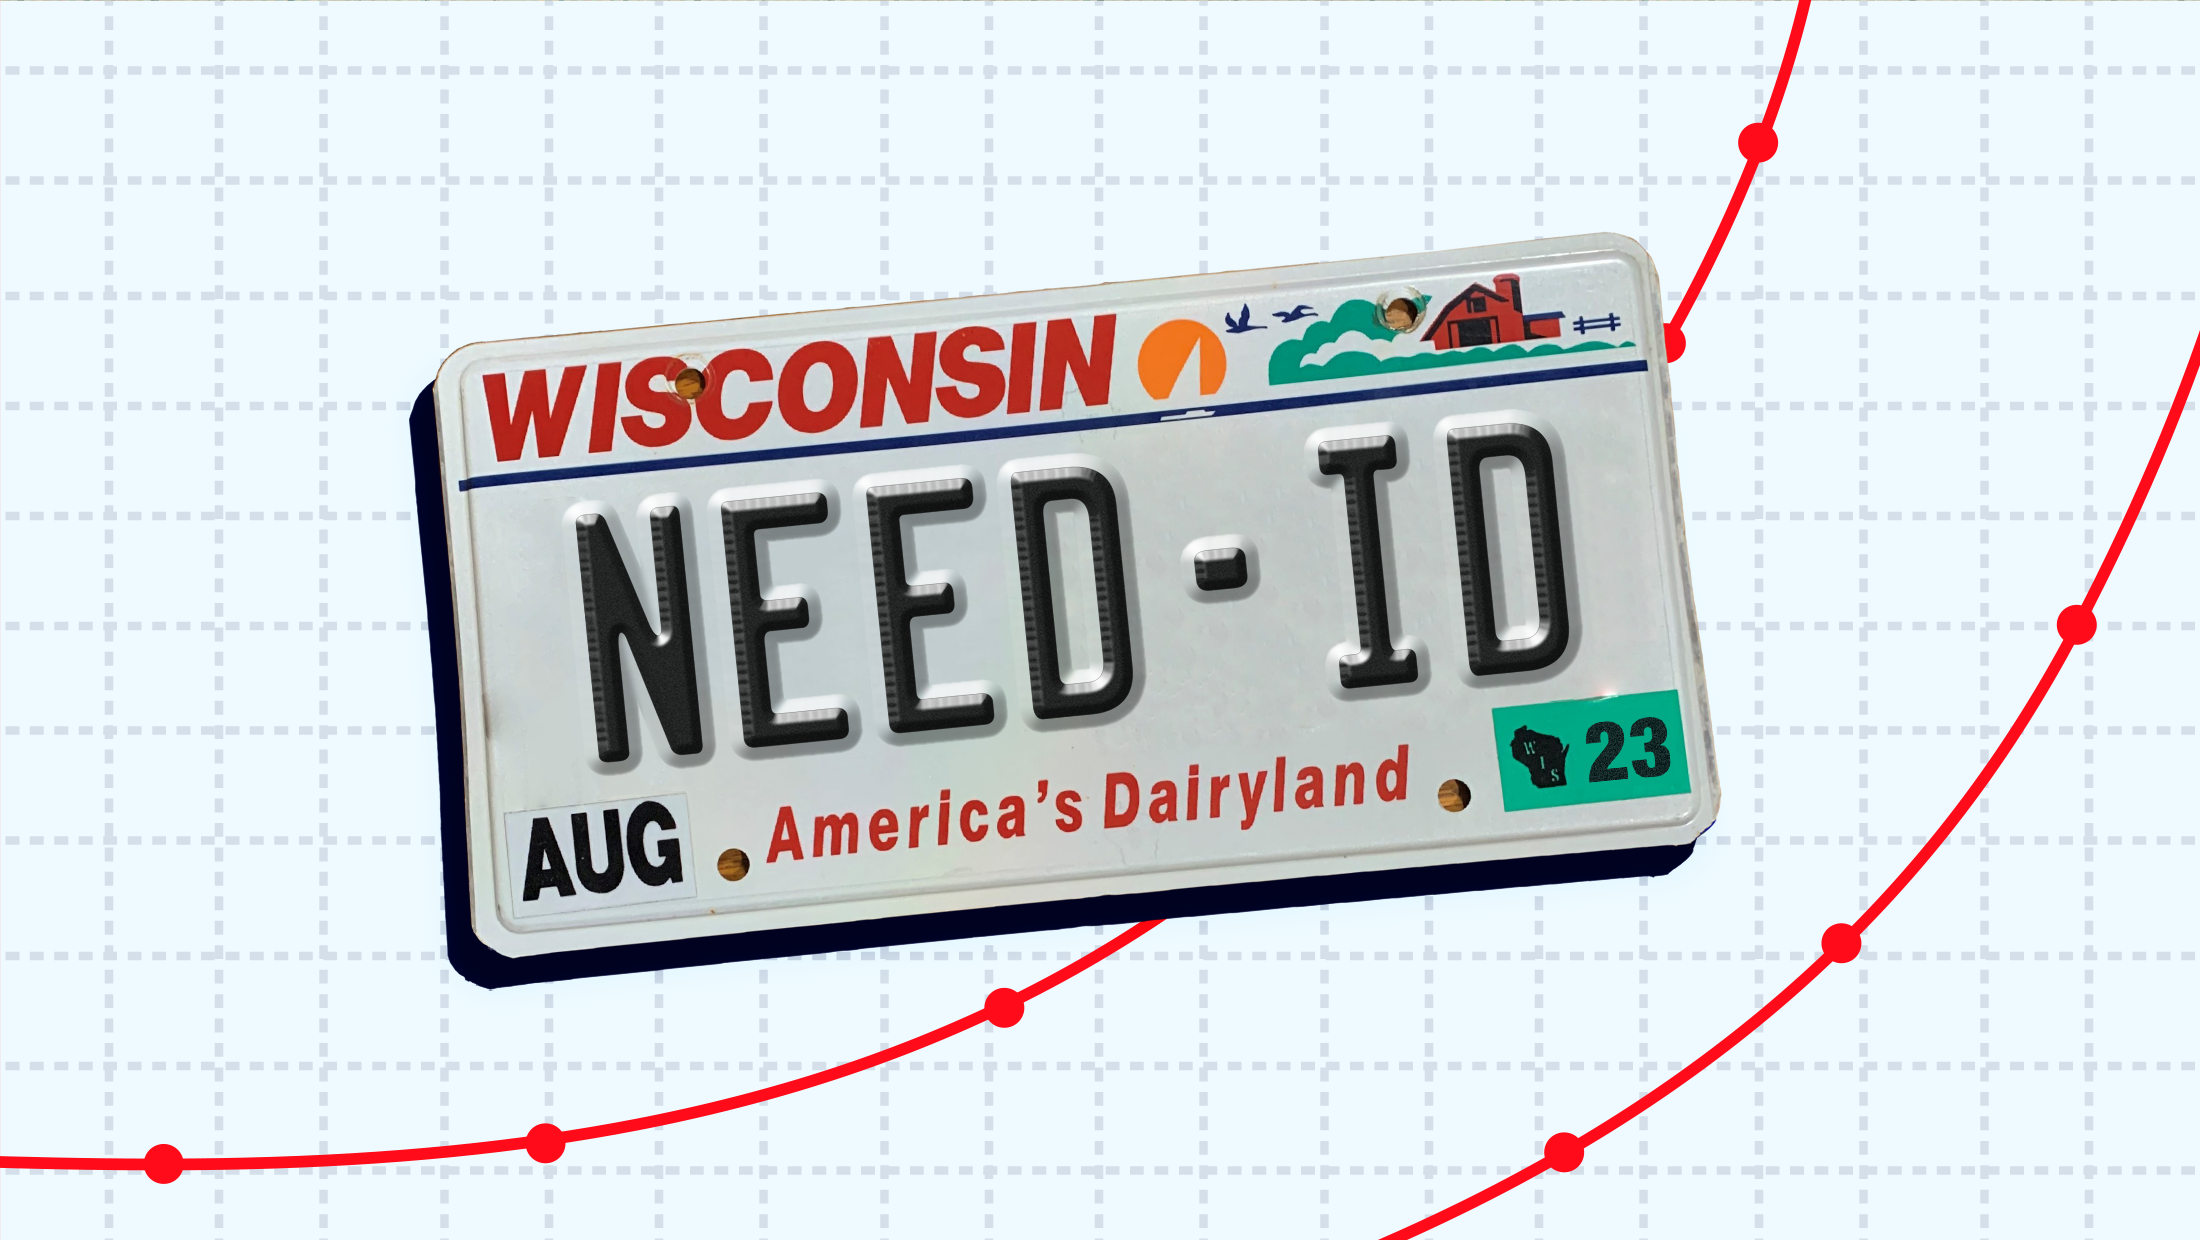 A Wisconsin license plate with text that says "NEED-ID", mounted on a piece of graph paper with various data points